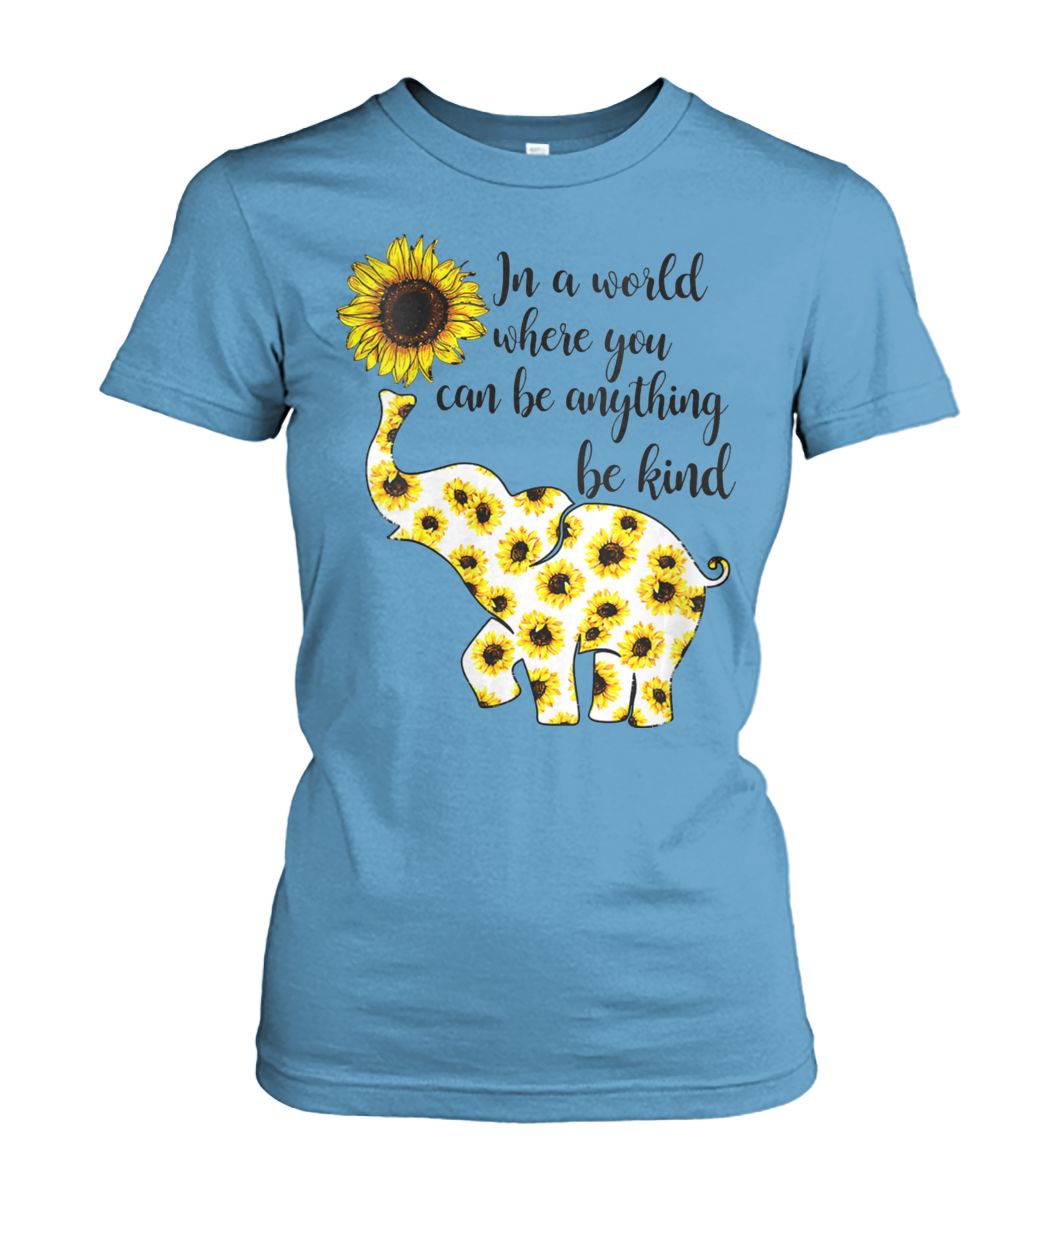 Sunflower elephant in a world where you can be anything be kind women's crew tee